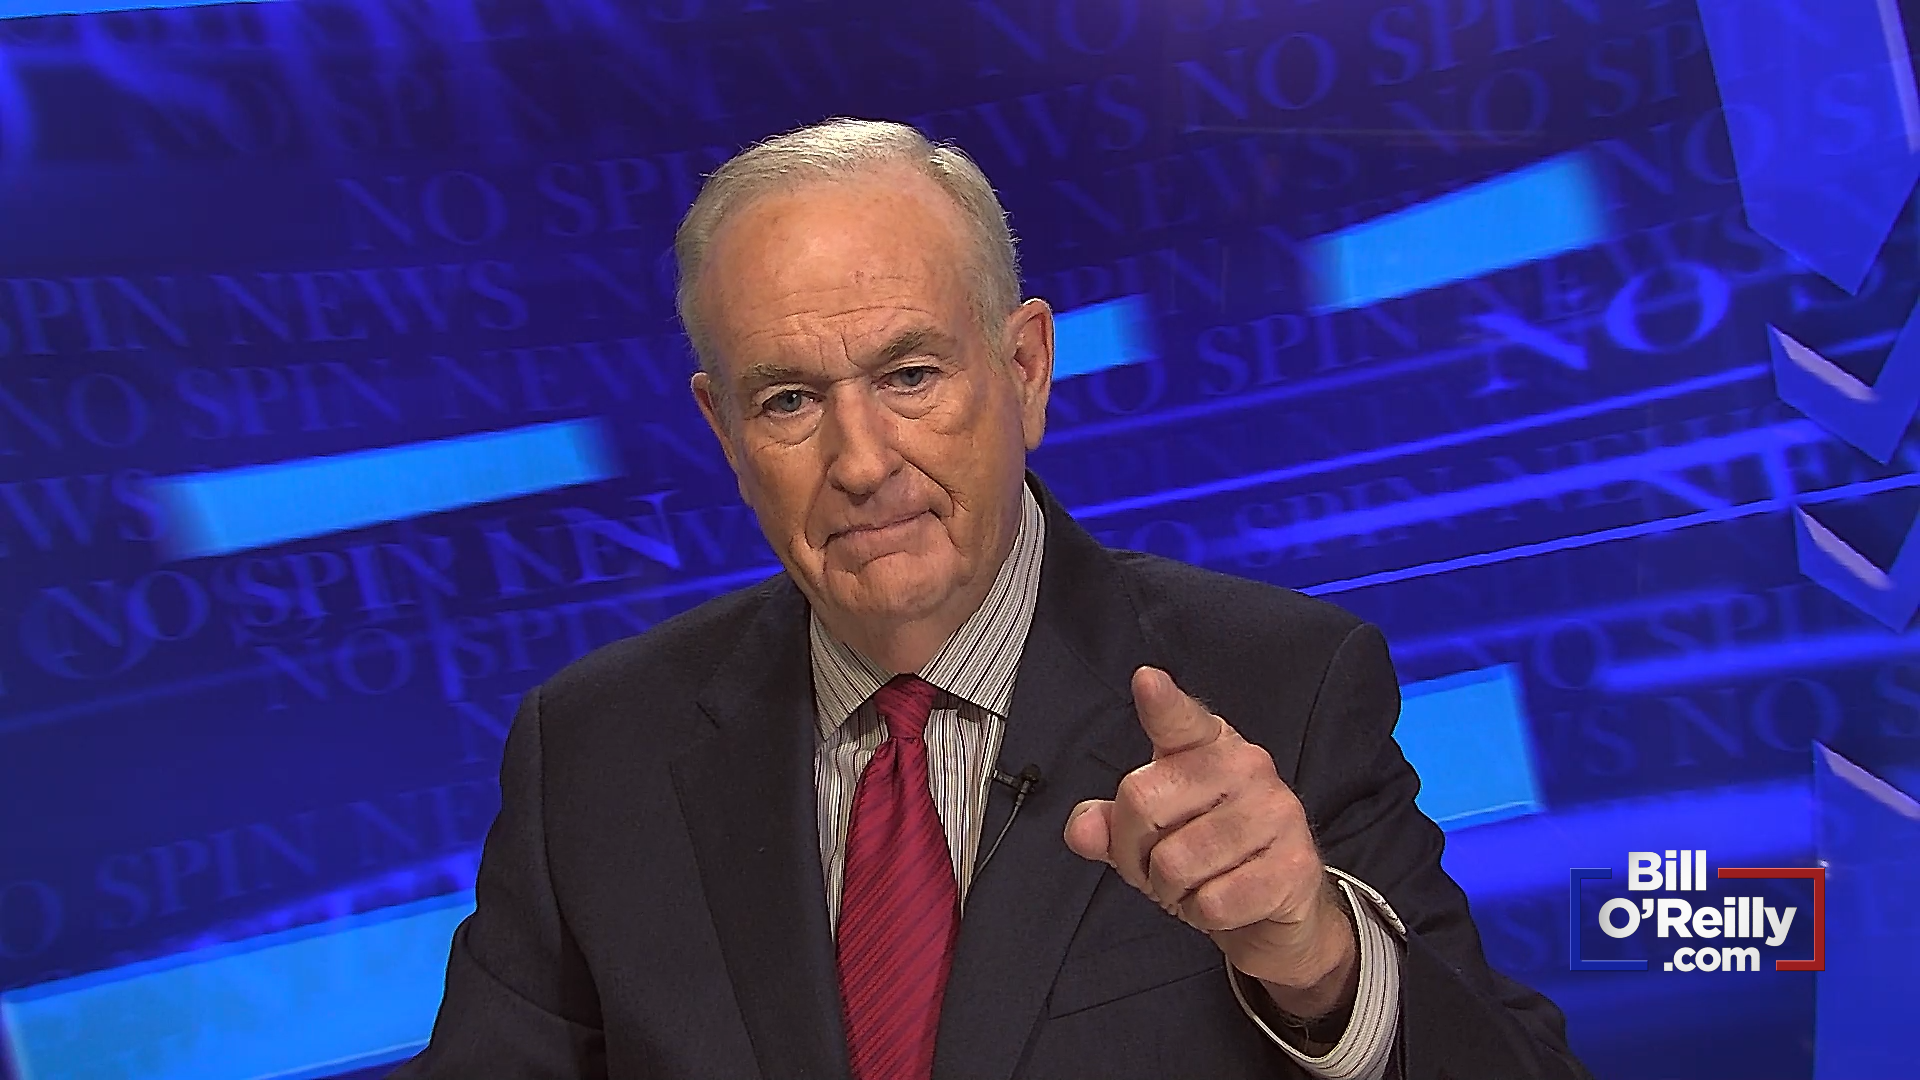 O'Reilly: The 'Ministry of Truth' Has No Teeth